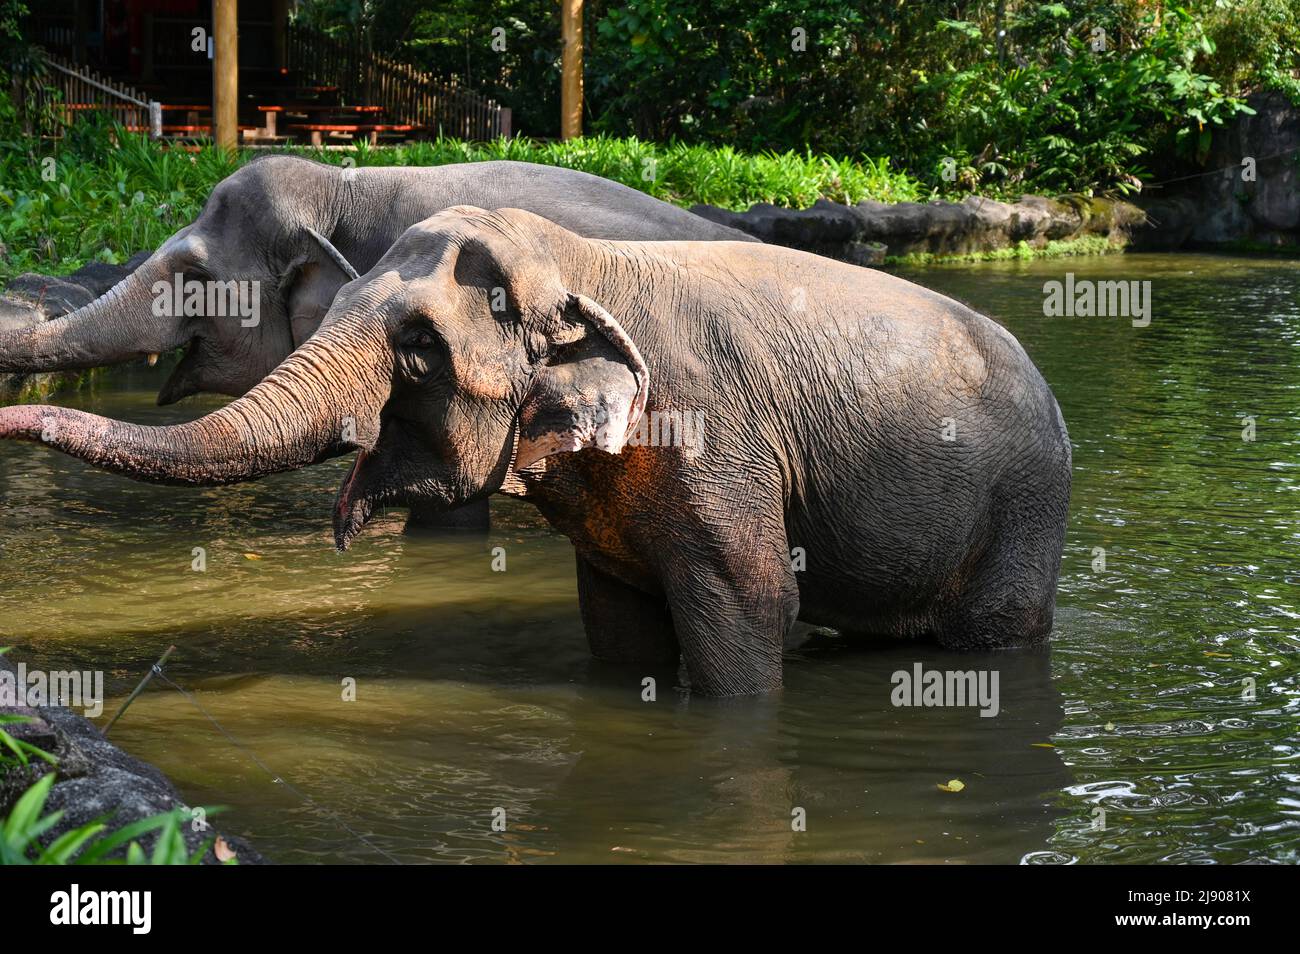 Two Elephants standing in a River submerge half of their body in water Stock Photo